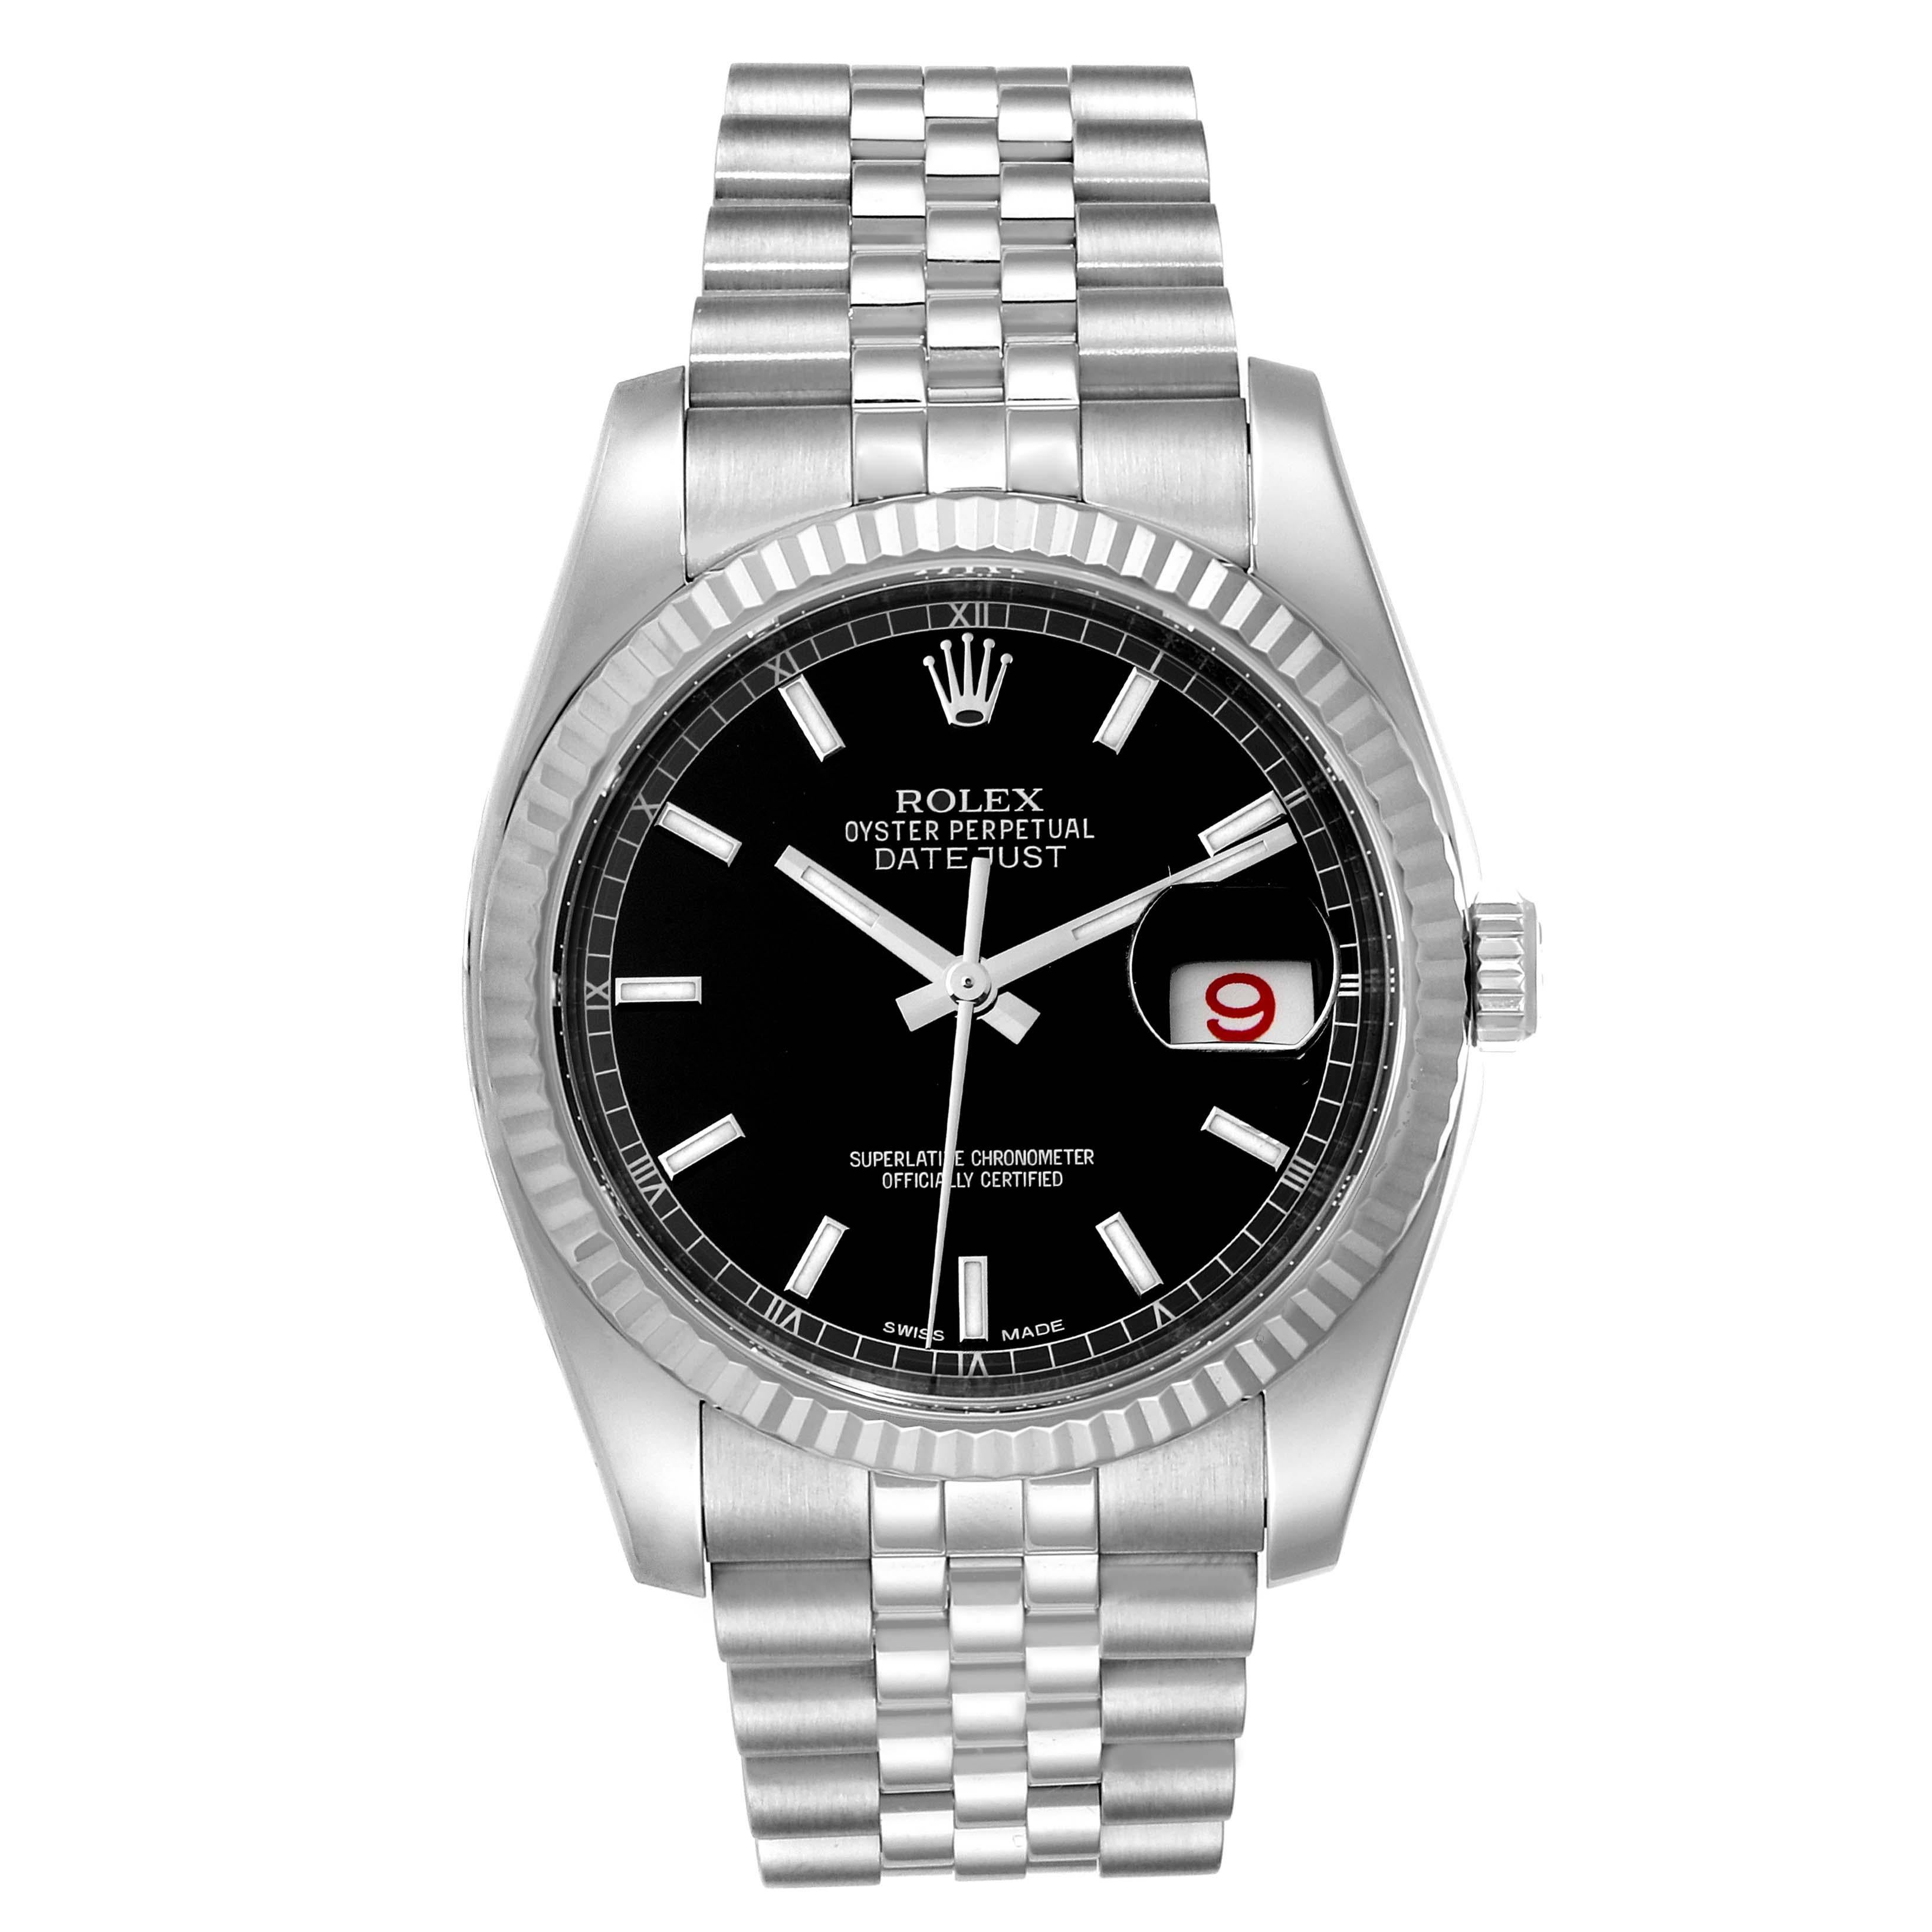 Rolex Datejust Steel White Gold Black Dial Mens Watch 116234 Box Card. Officially certified chronometer self-winding movement. Stainless steel case 36.0 mm in diameter.  Rolex logo on a crown. 18K white gold fluted bezel. Scratch resistant sapphire